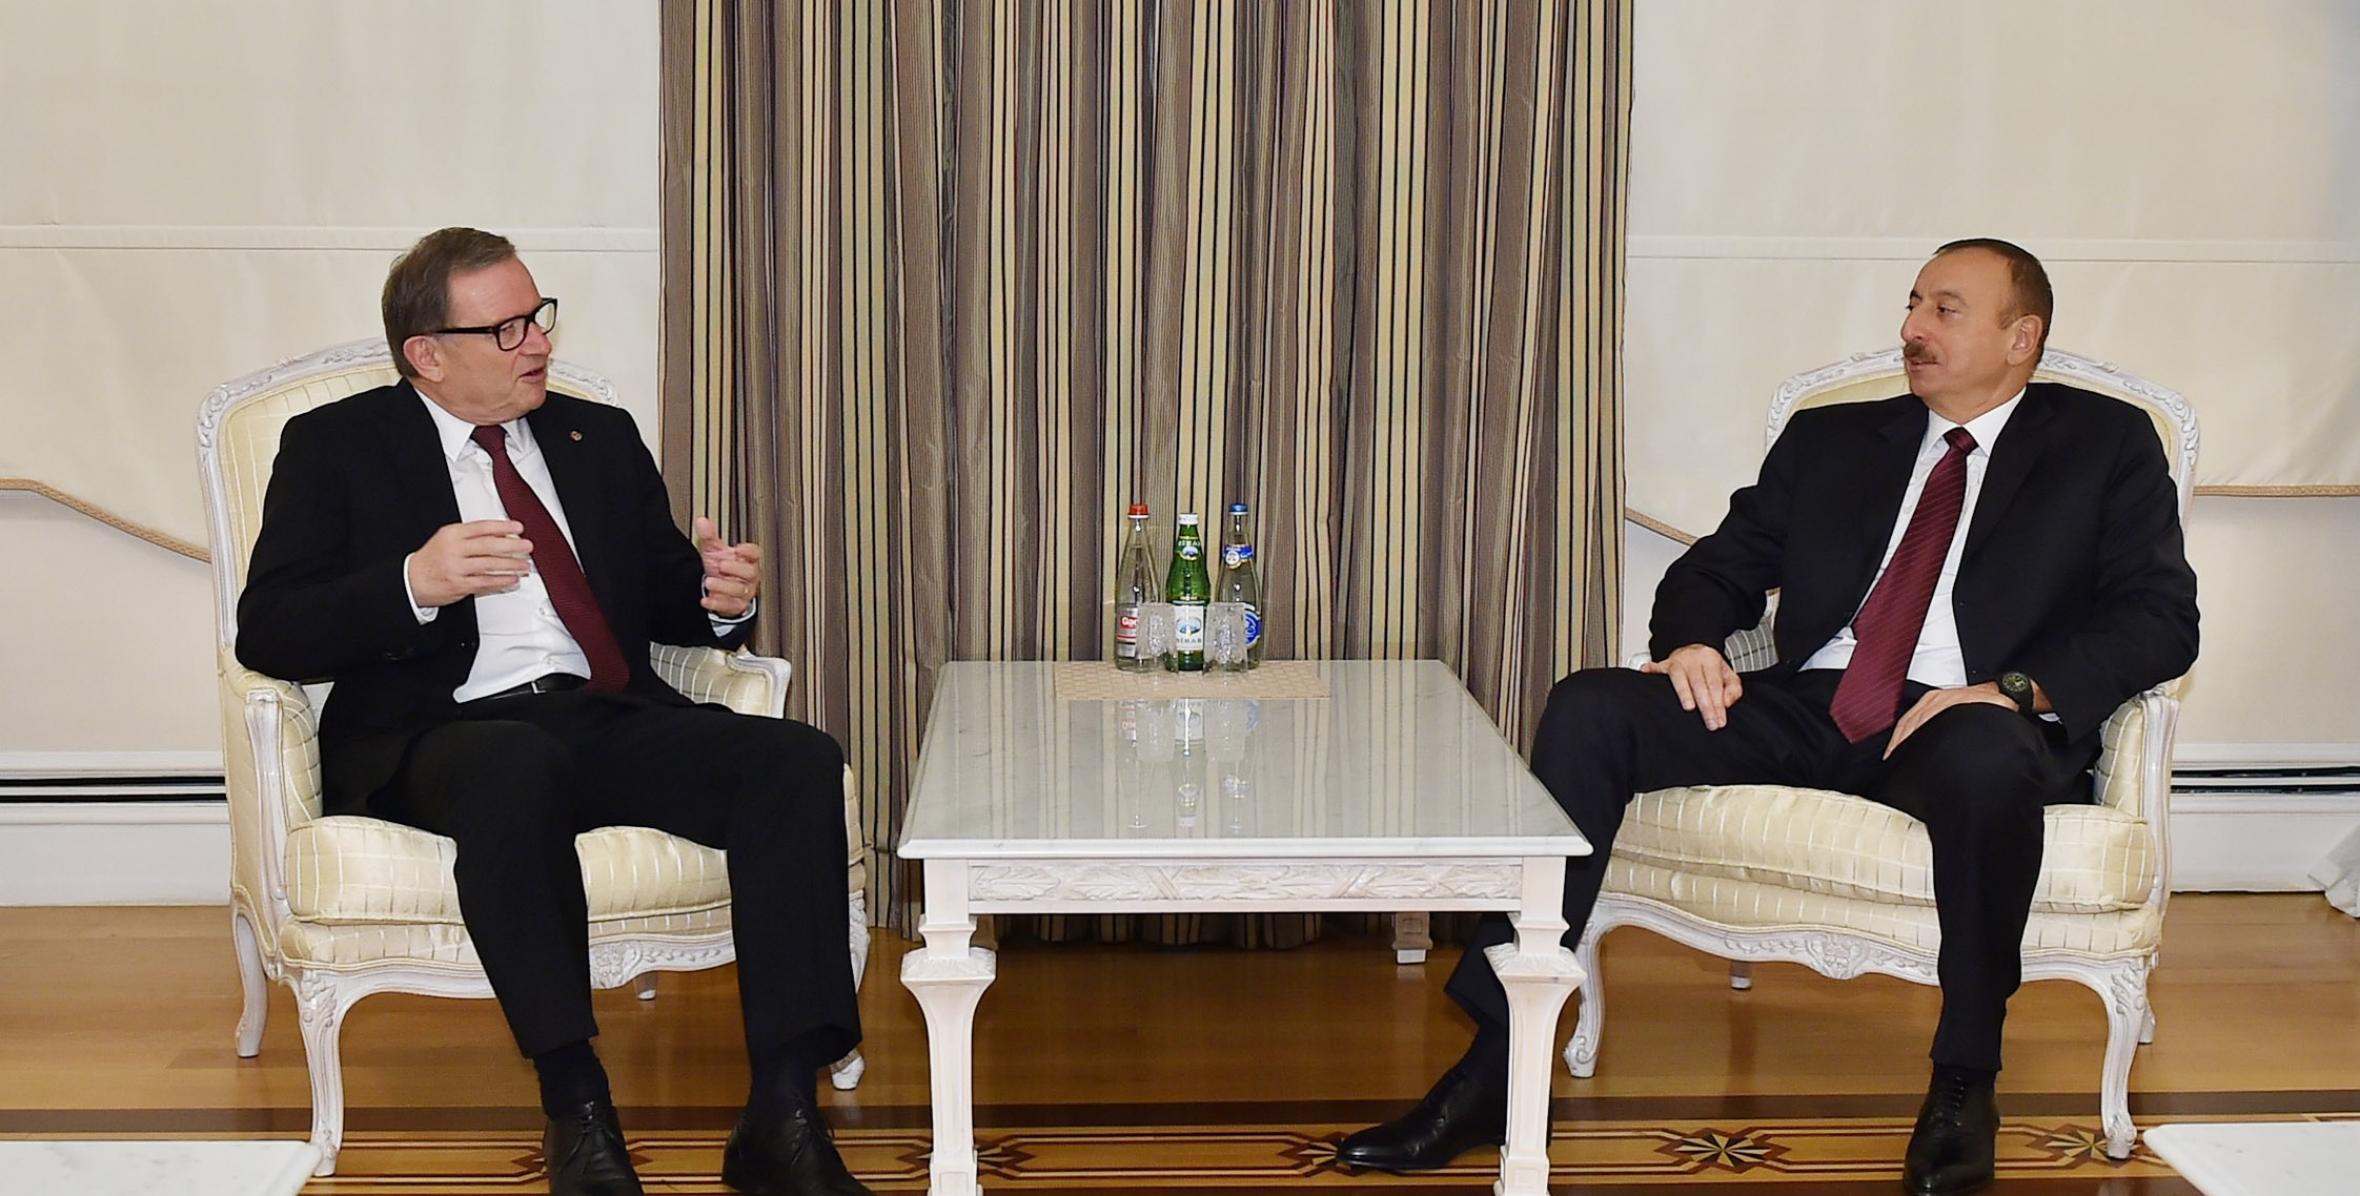 Ilham Aliyev received the Second President of the National Council of the Austrian Parliament